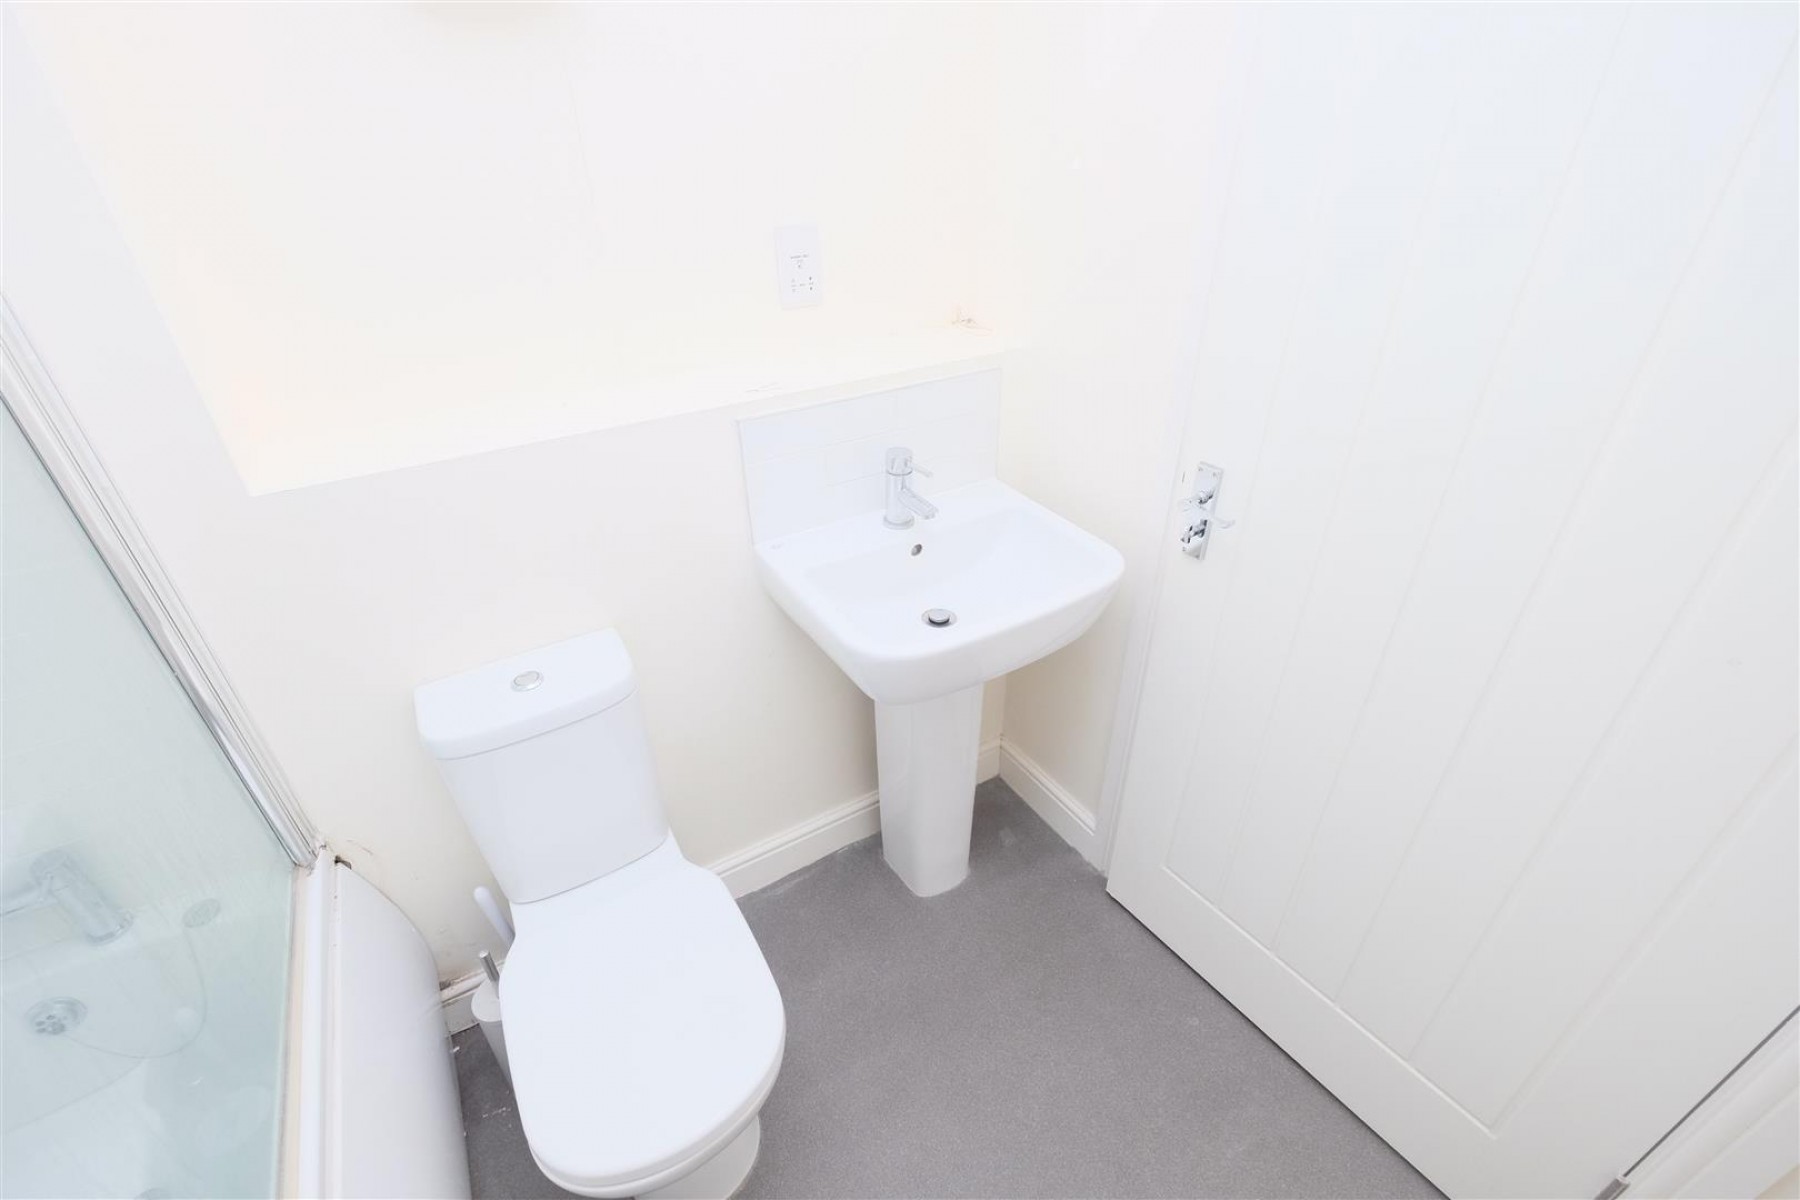 Images for TENANTED FLAT | MIDSOMER NORTON